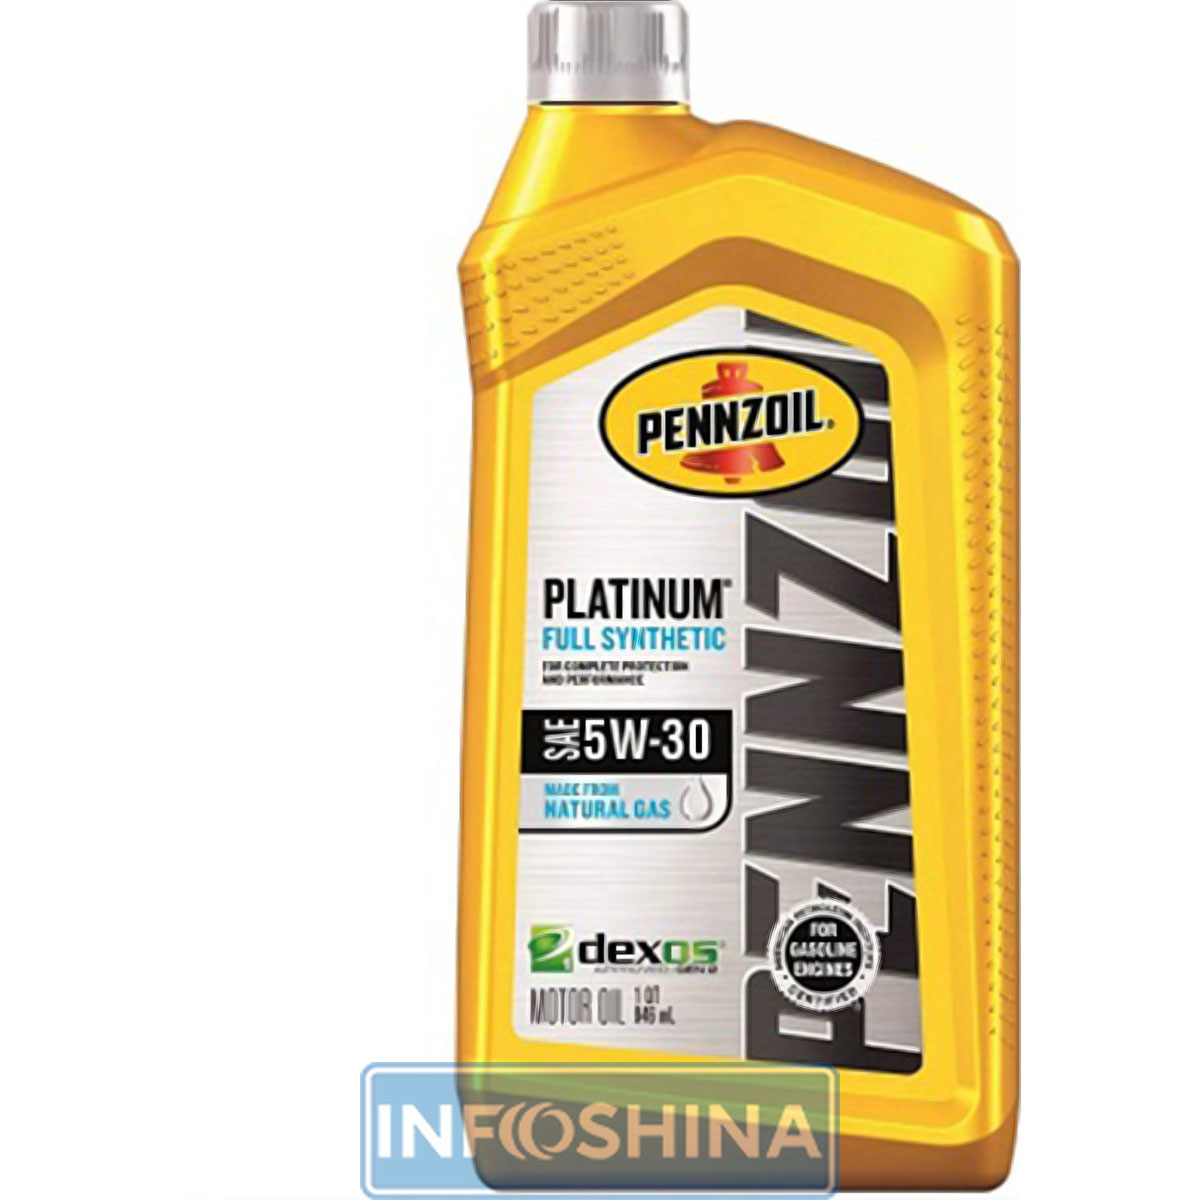 Pennzoil Platinum Fully Synthetic